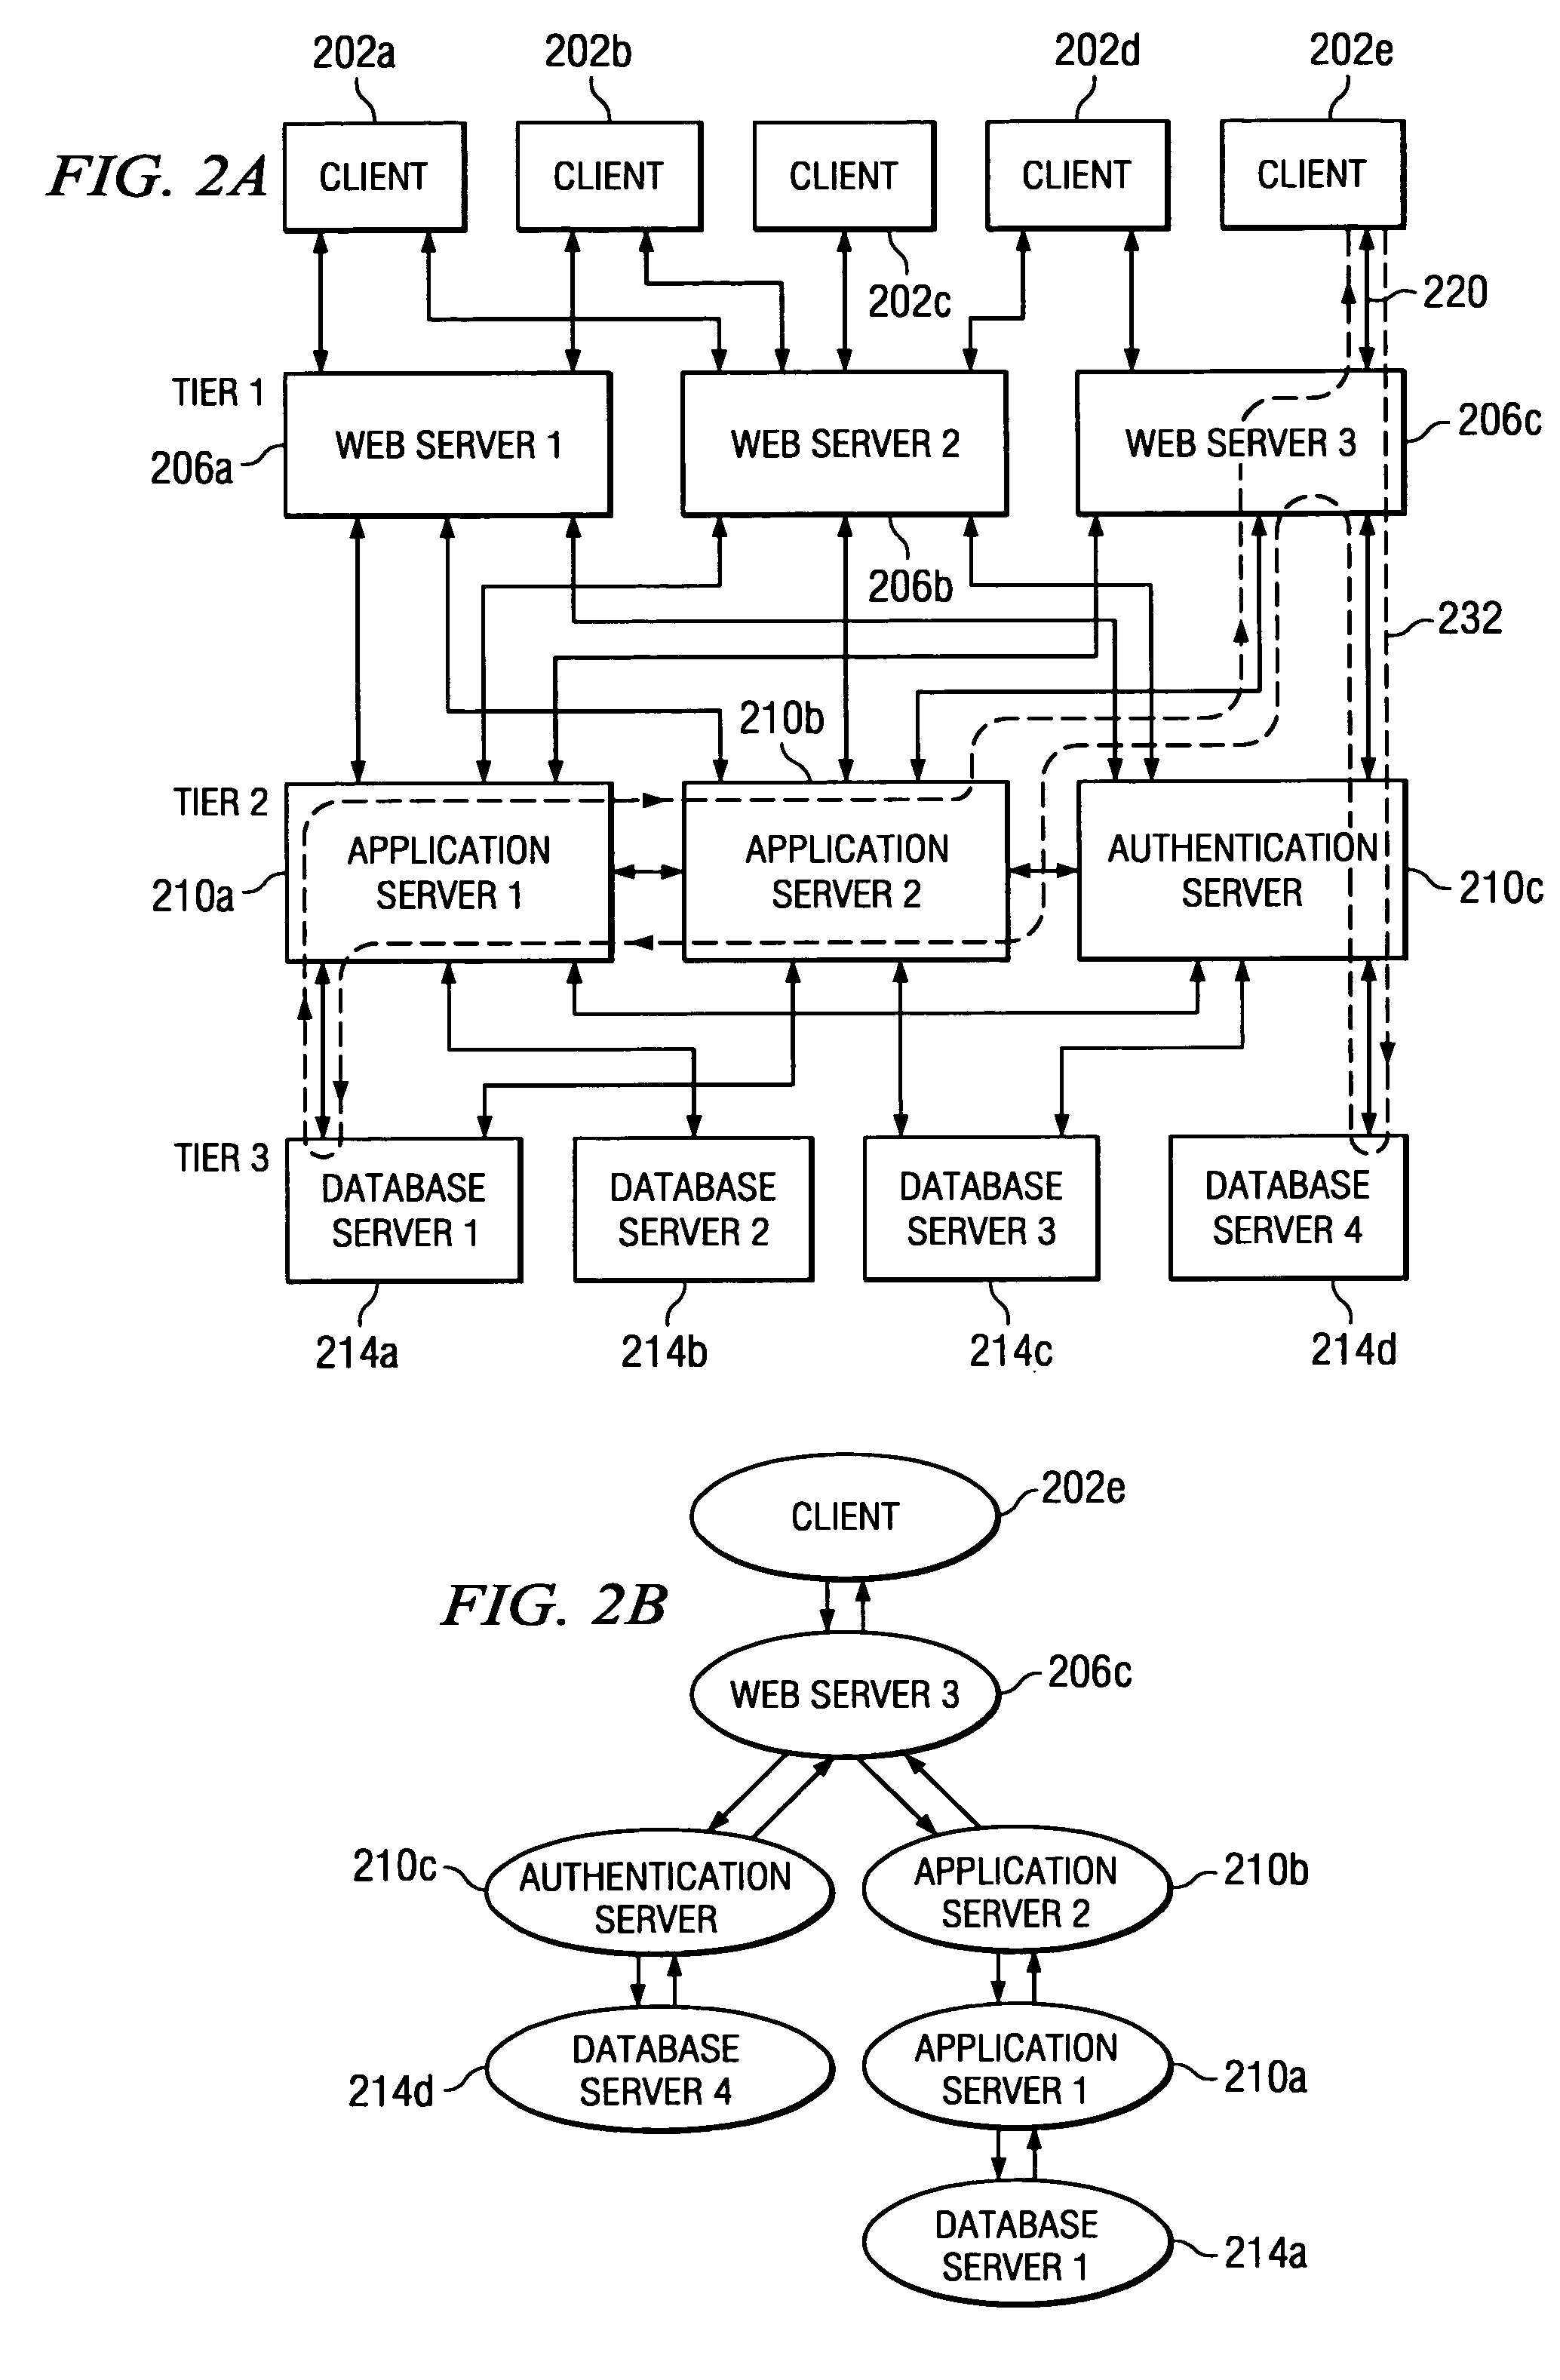 System and method for inferring causal paths in a distributed computing environment